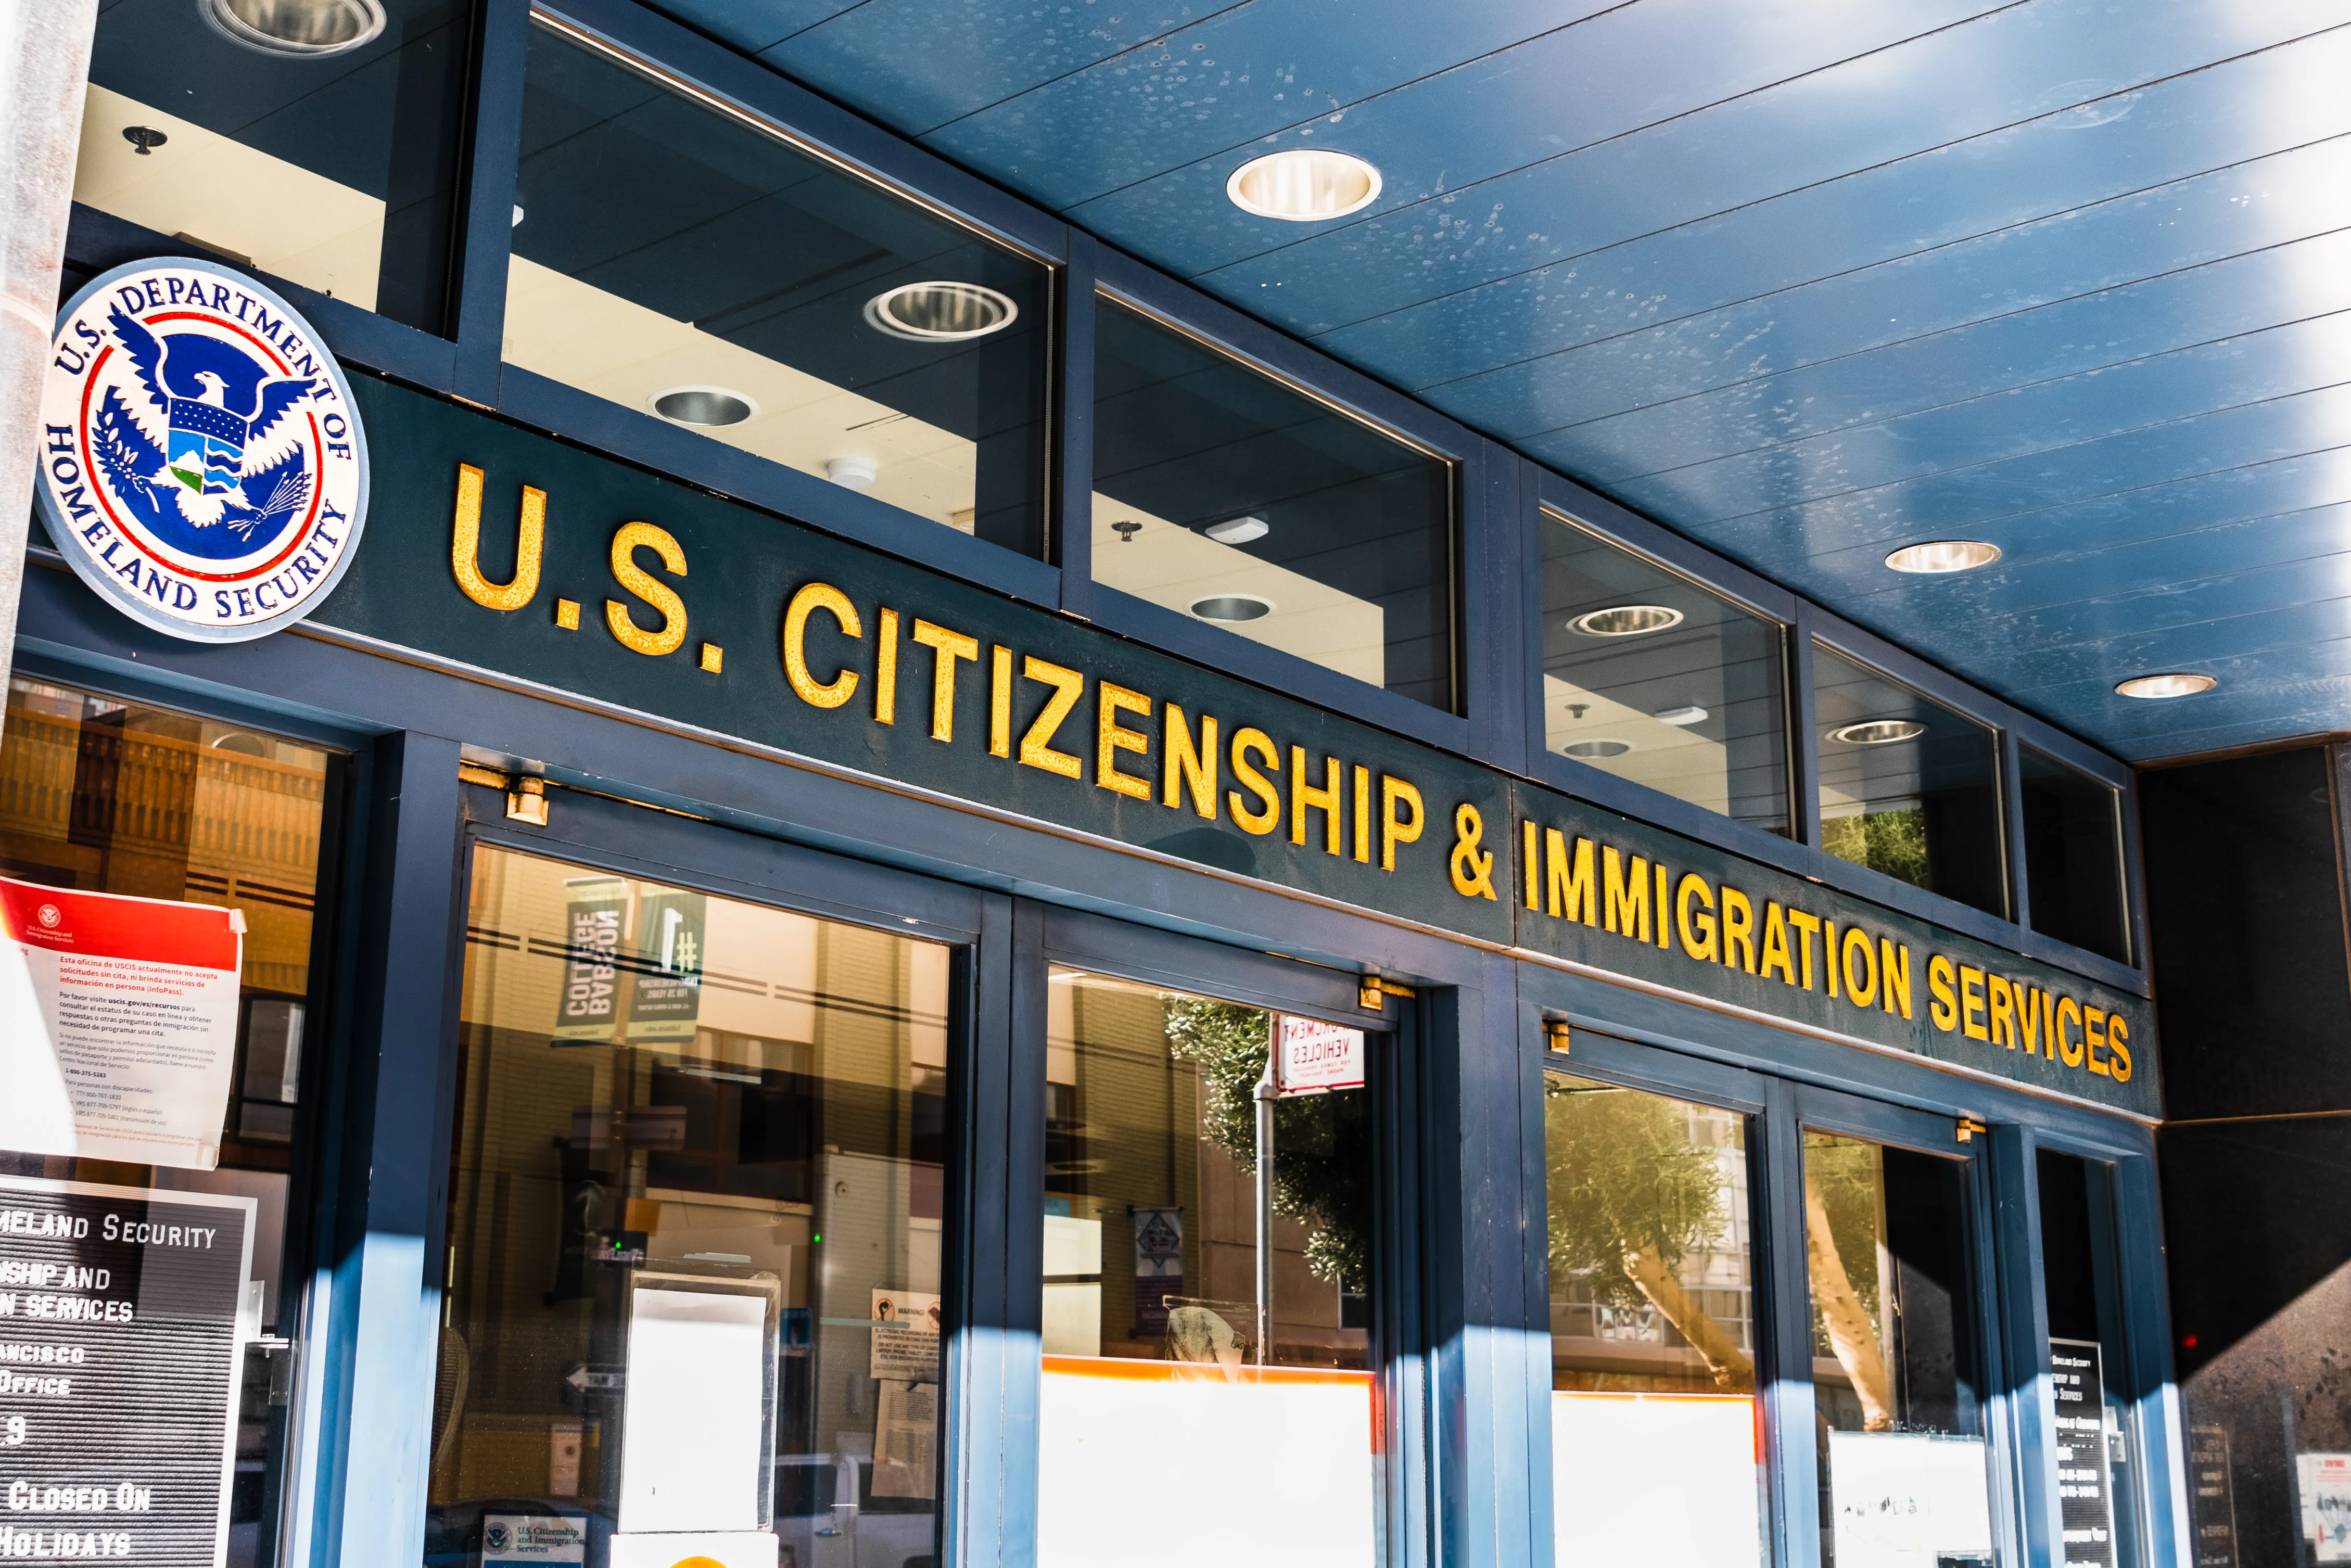 Doors to a building below a sign reading "US Citizenship and Immigration Services"